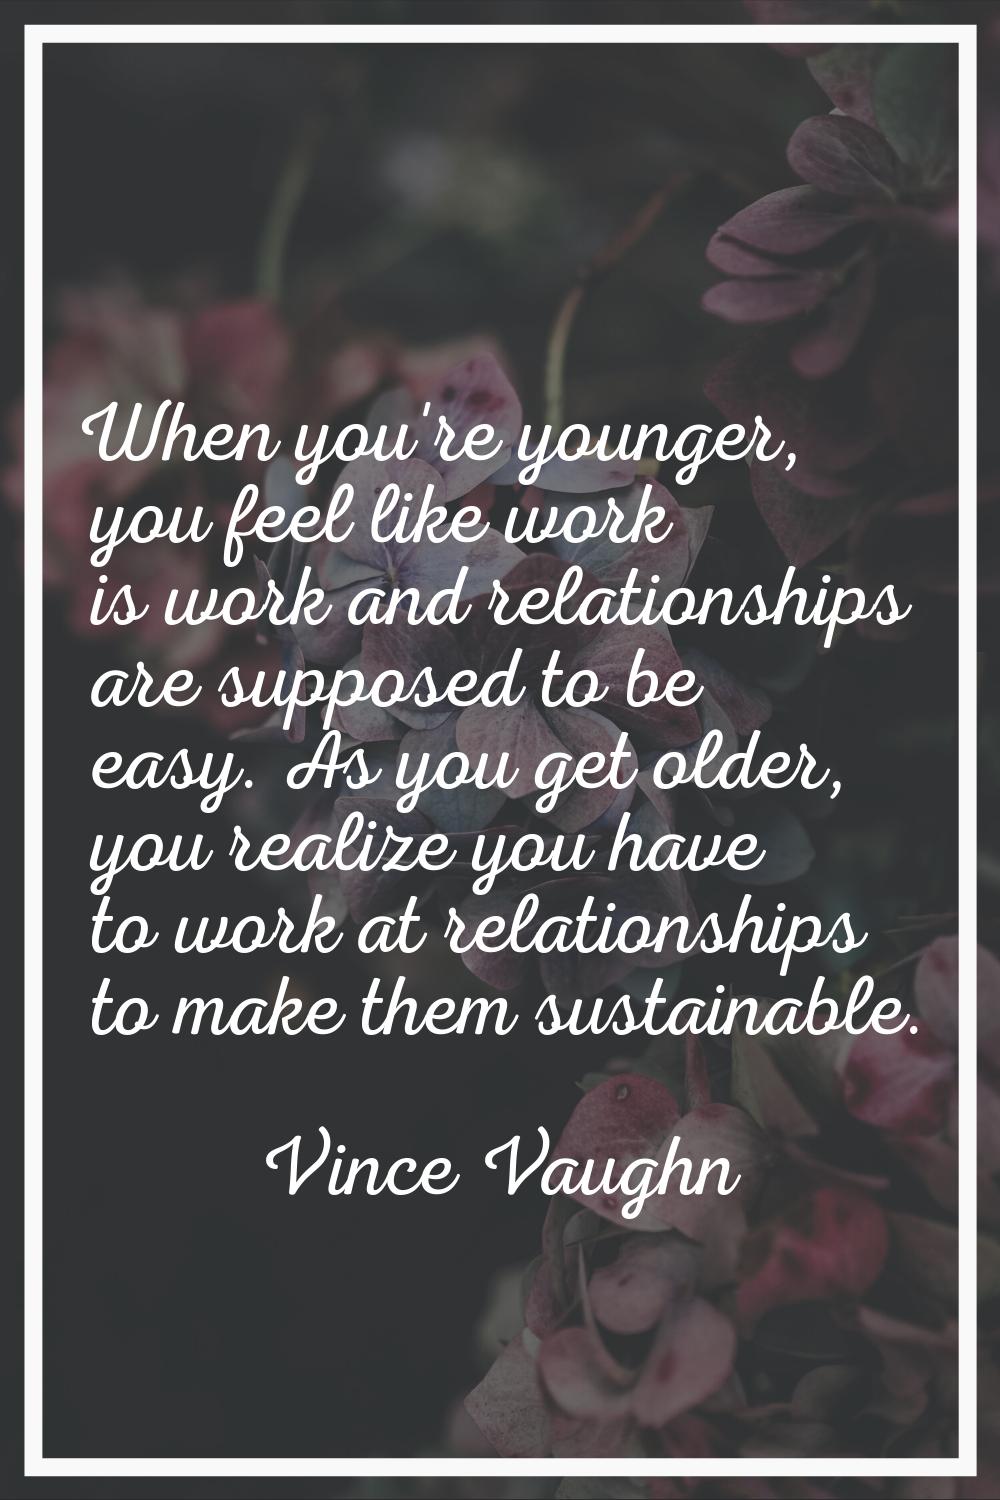 When you're younger, you feel like work is work and relationships are supposed to be easy. As you g